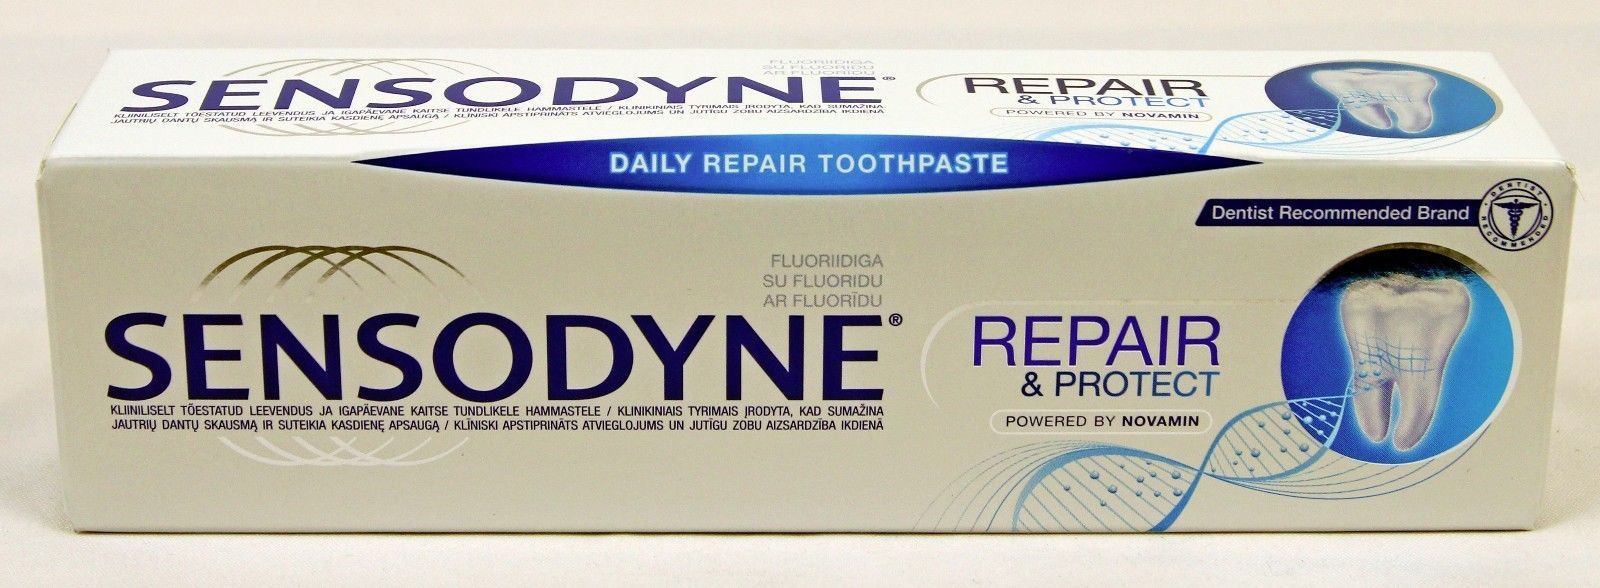 Sensodyne with Fluoride Repair and Protect Daily Repair ToothPaste Tooth Paste - $9.99